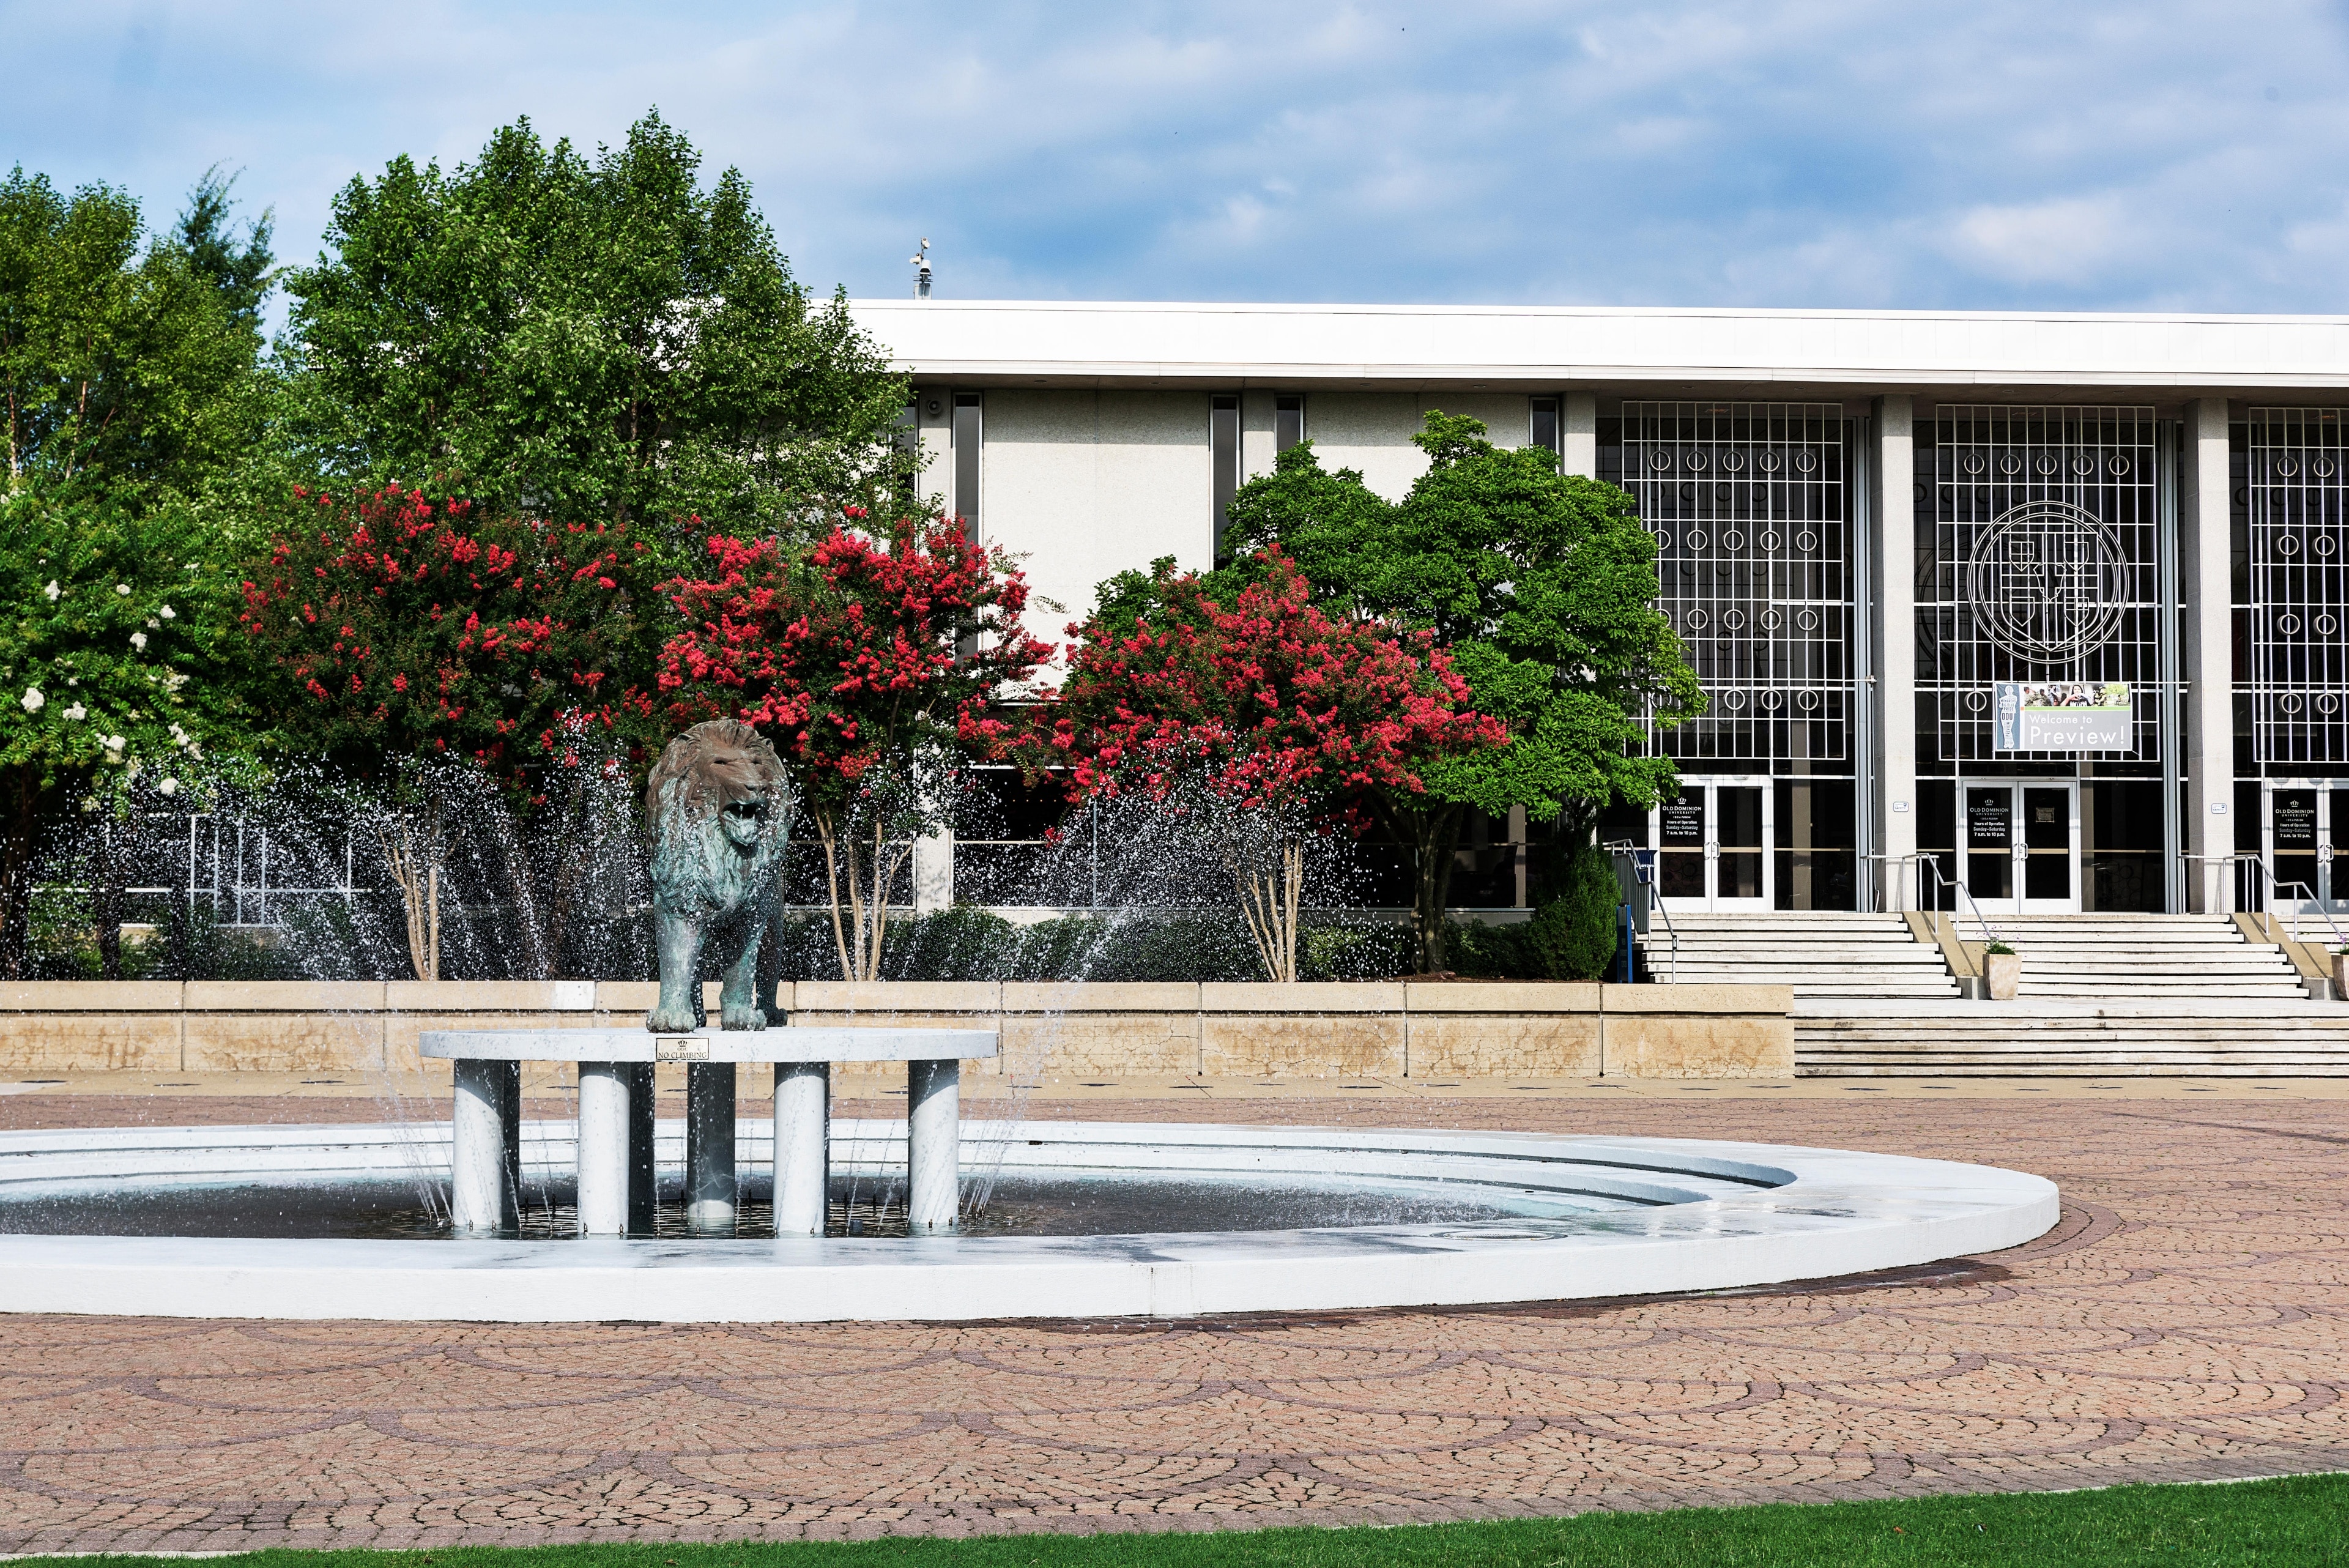 Enjoy the student vibe with a visit to Old Dominion University, a top university in Norfolk. Experience the area's great live music or attend a sporting event. 